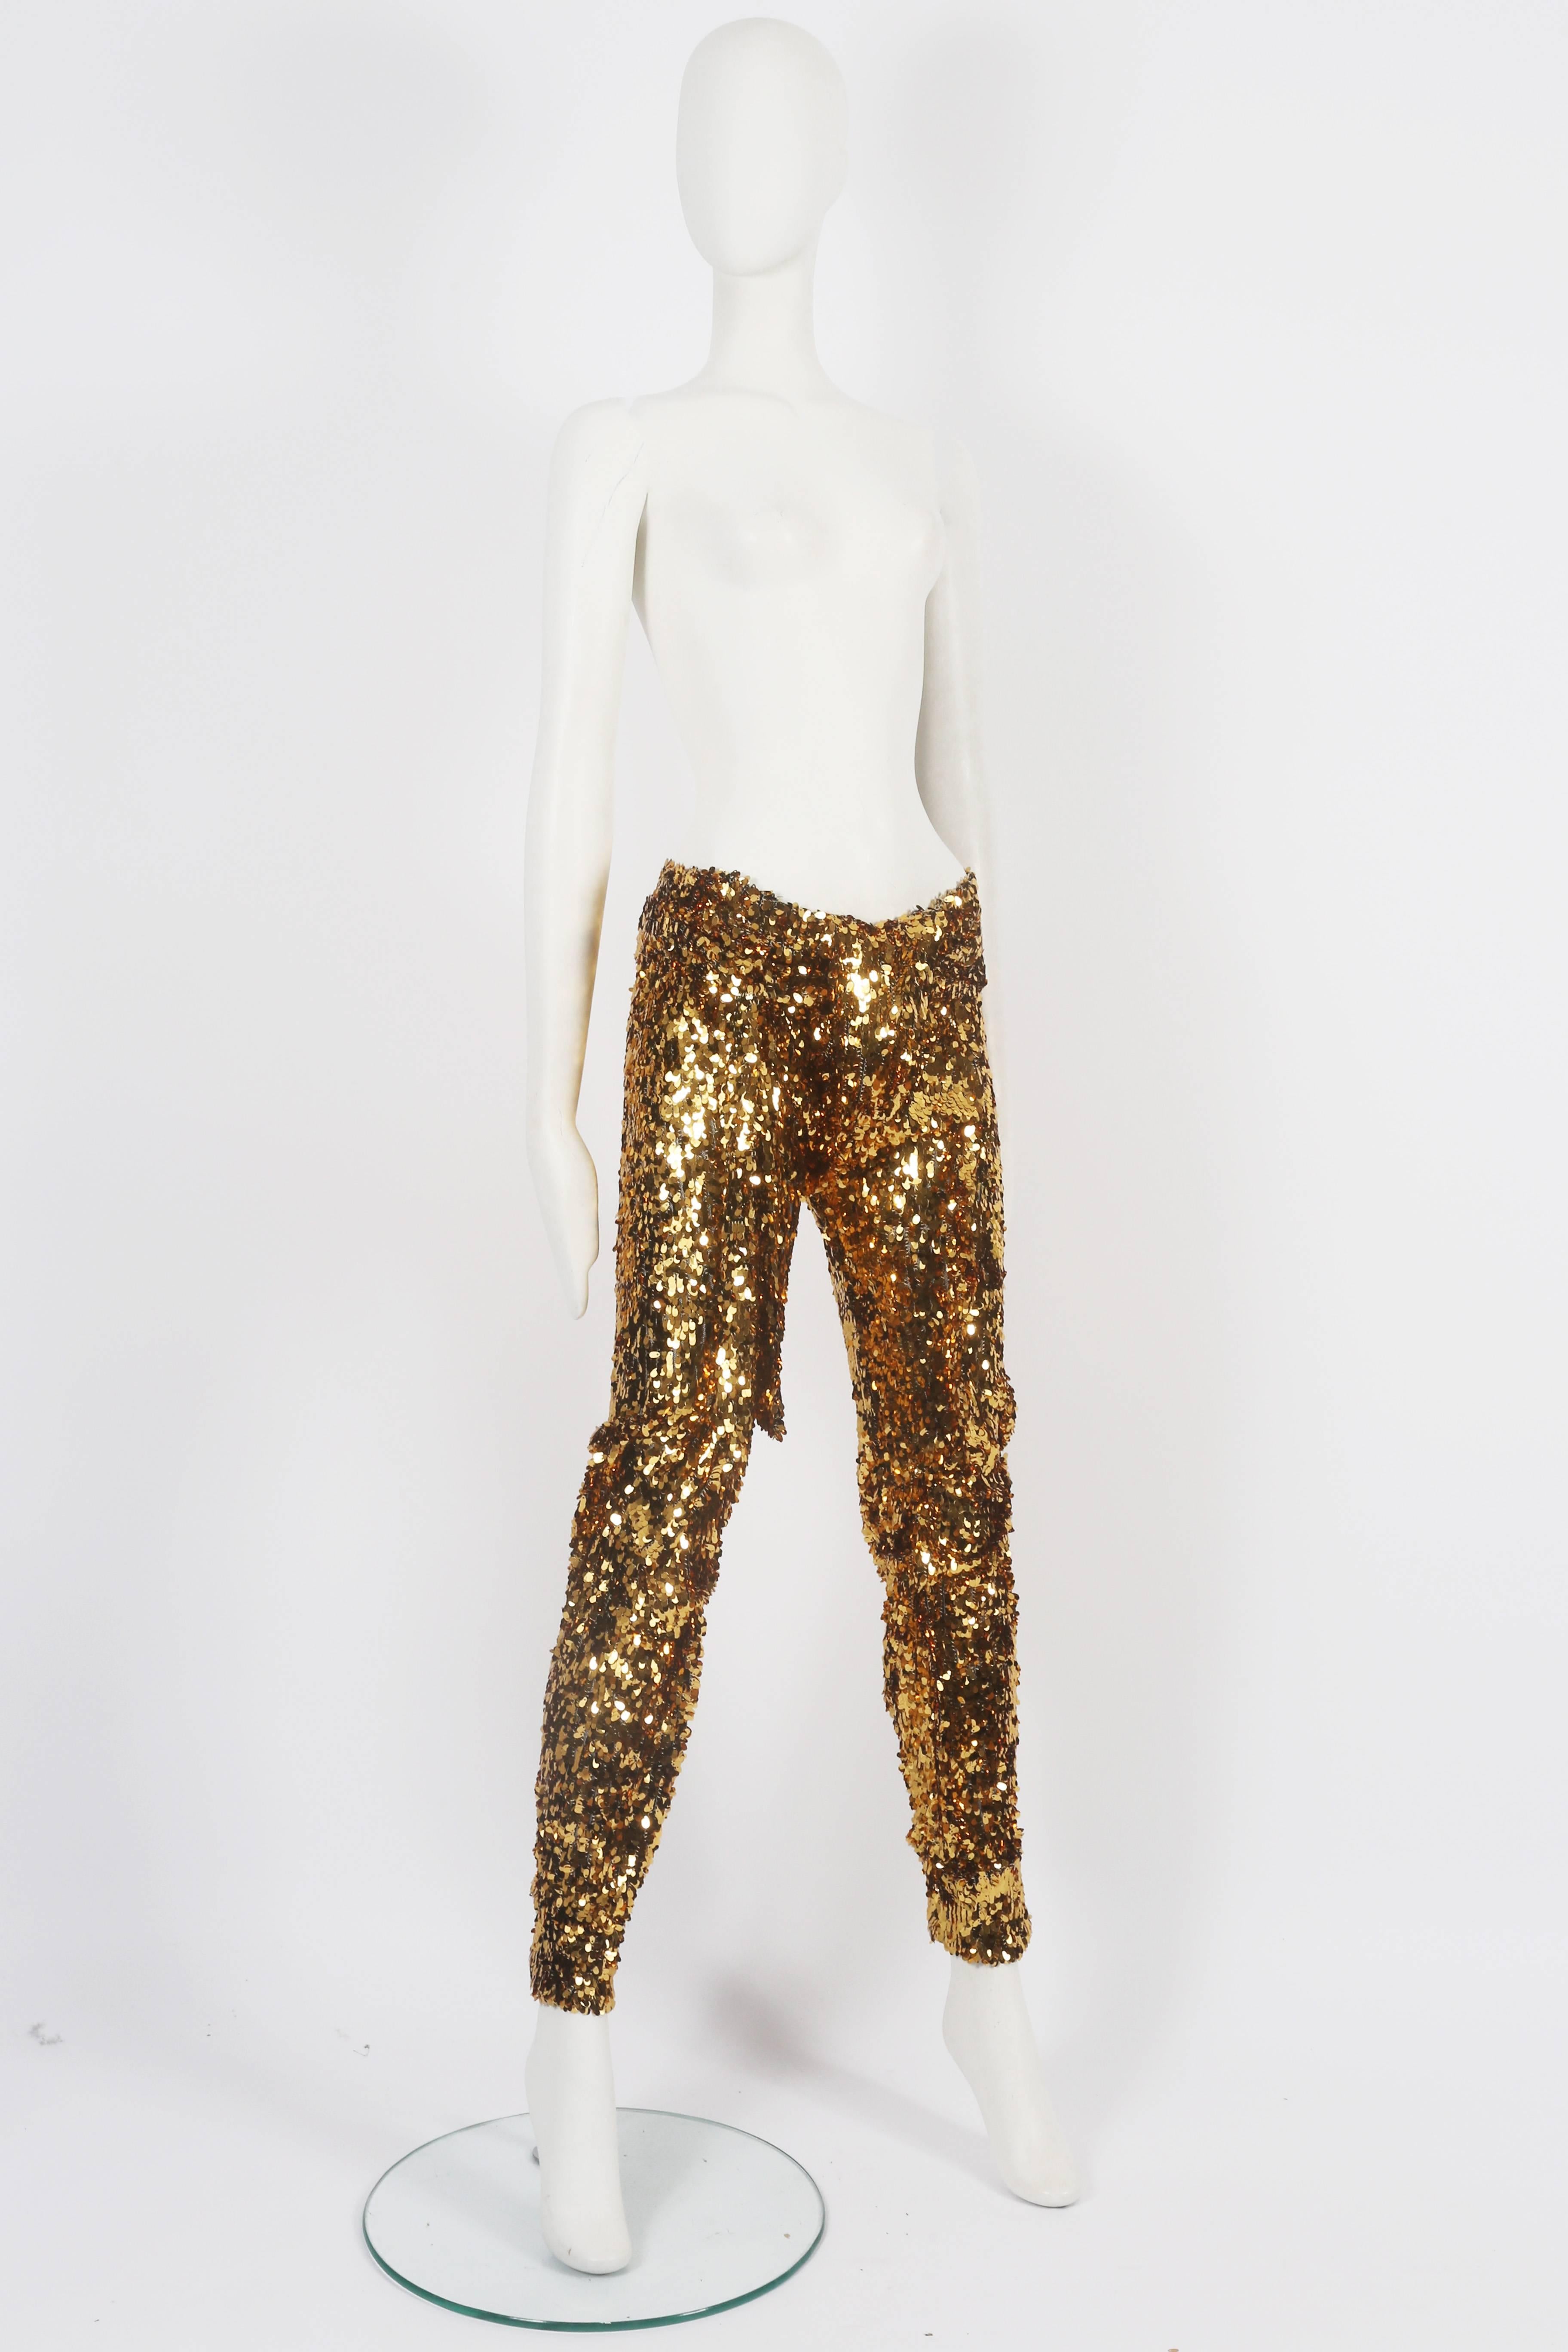 Brown Vivienne Westwood gold sequinned evening pants, circa 2011